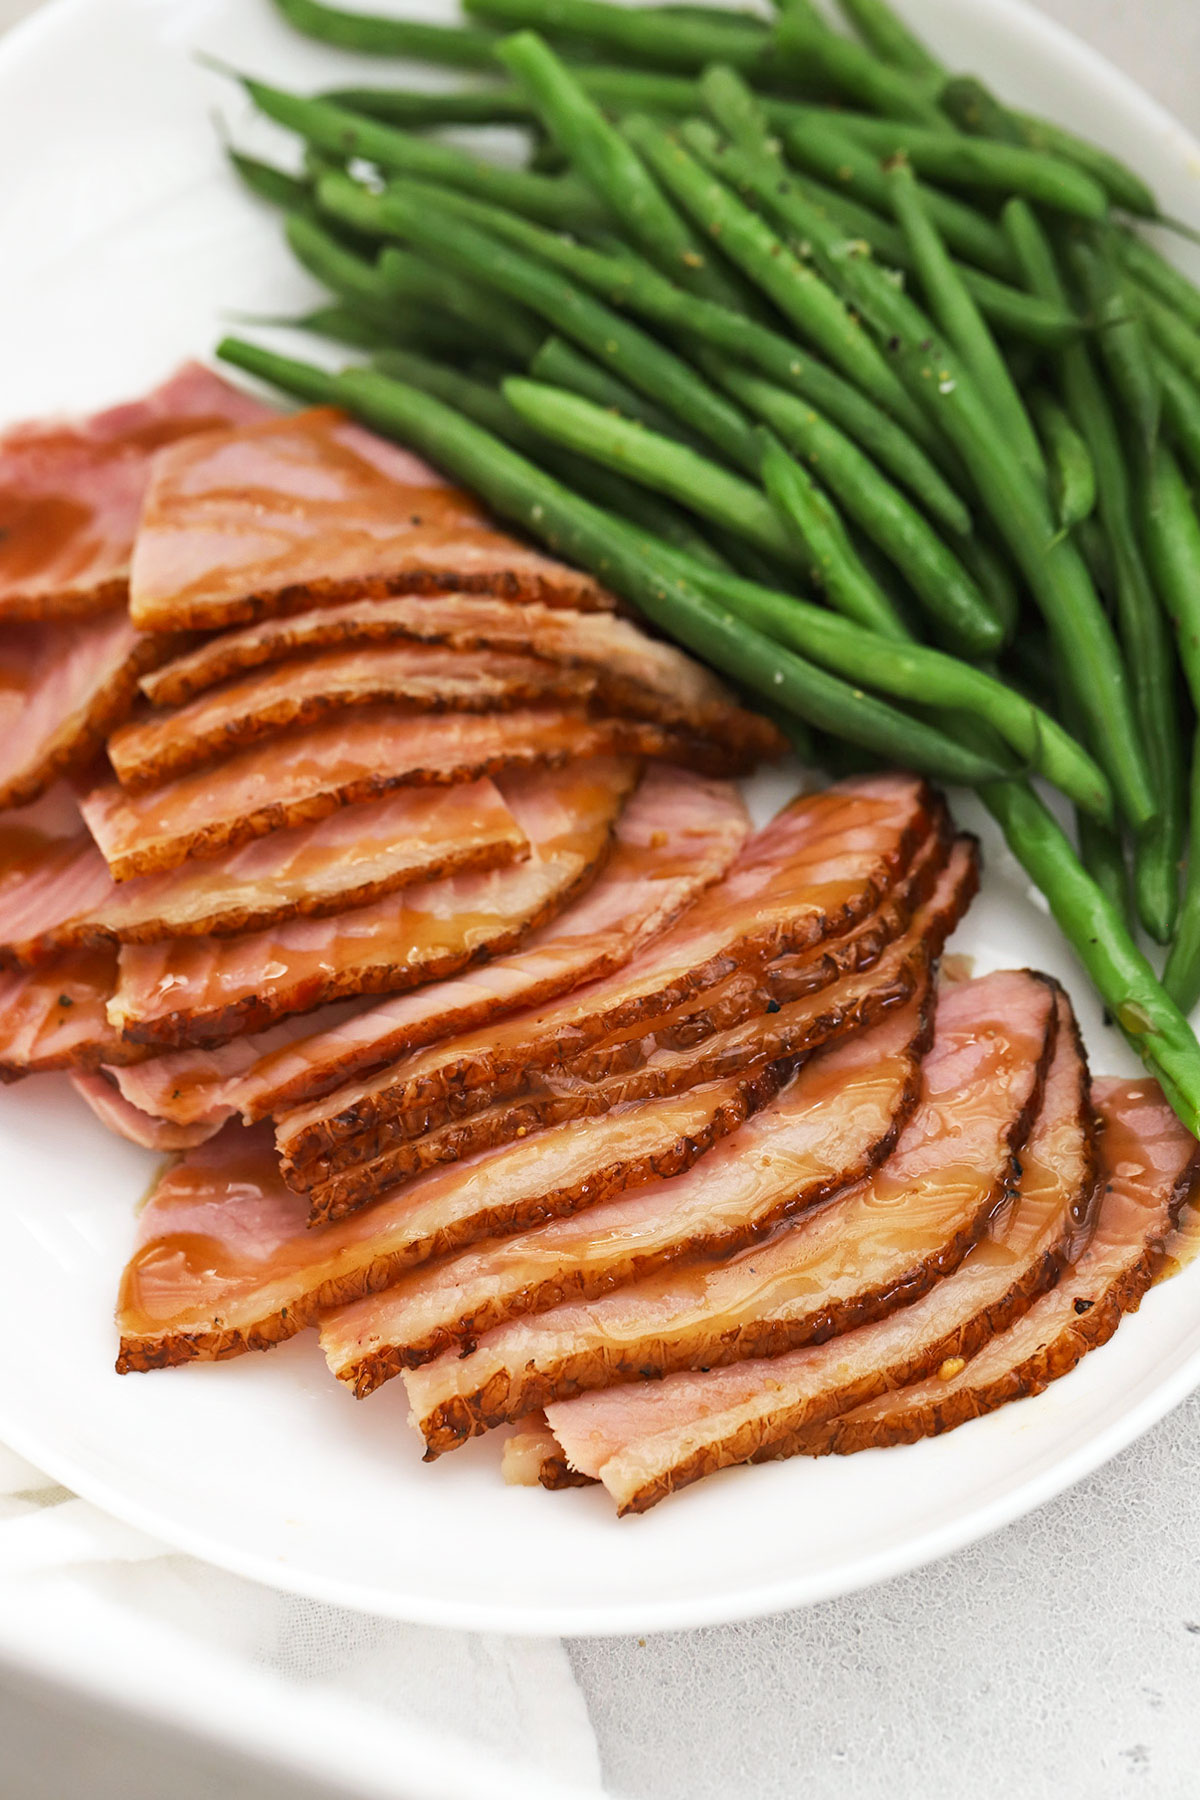 Slices of glazed ham on a white plate with steamed green beans